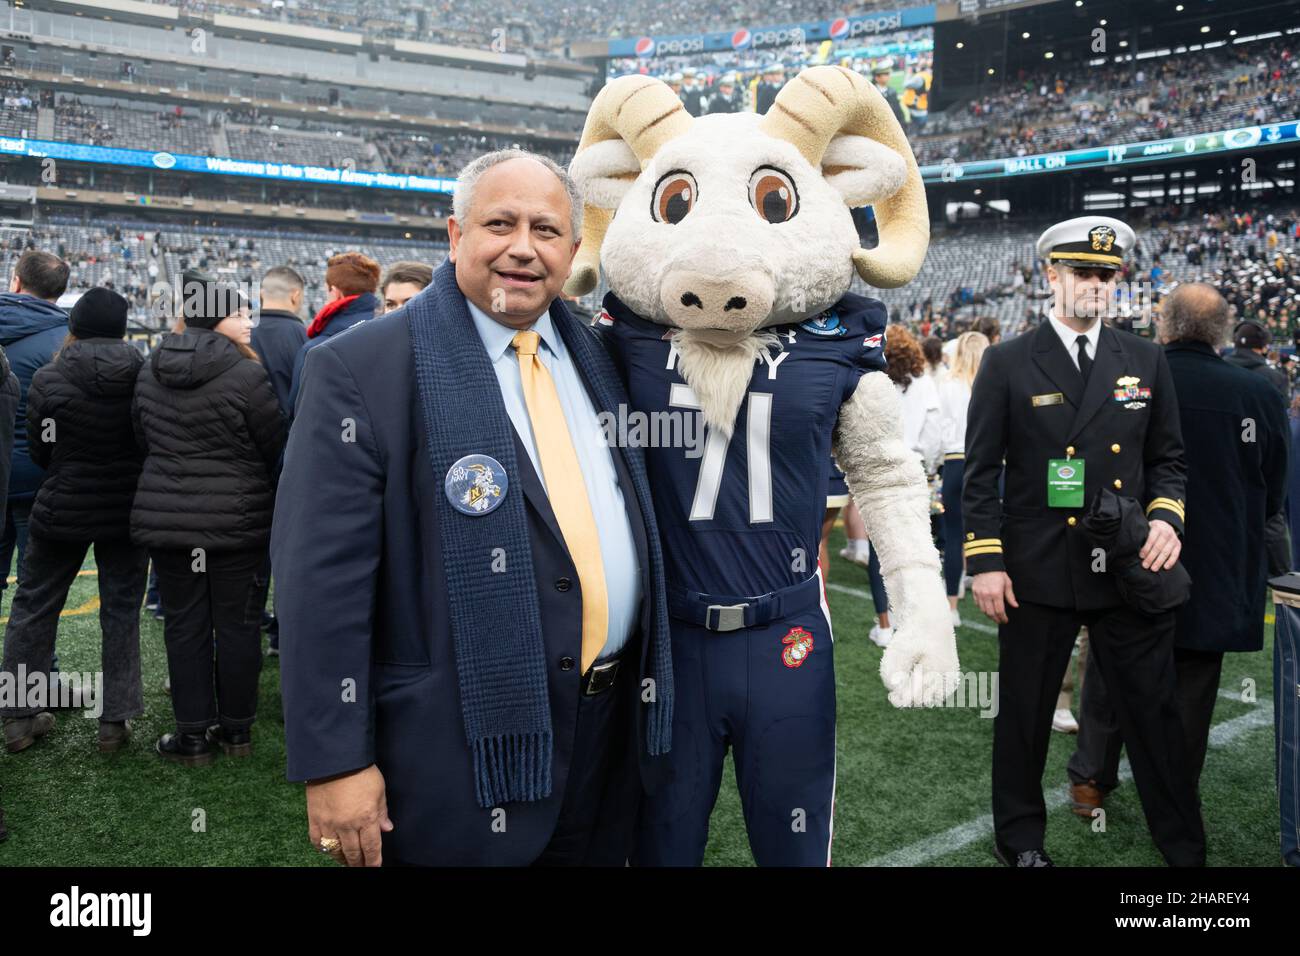 East Rutherford, United States of America. 11 December, 2021. U.S. Secretary of the Navy Carlos Del Toro cheers on the crowd with Naval Academy costumed mascot Bill the Goat, during the start of the annual Army-Navy football game at Metlife Stadium December 11, 2021 in East Rutherford, New Jersey. The U.S. Naval Academy Midshipmen defeated the Army Black Knights 17-13 in their 122nd matchup.  Credit: Stacy Godfrey/U.S. Navy Photo/Alamy Live News Stock Photo